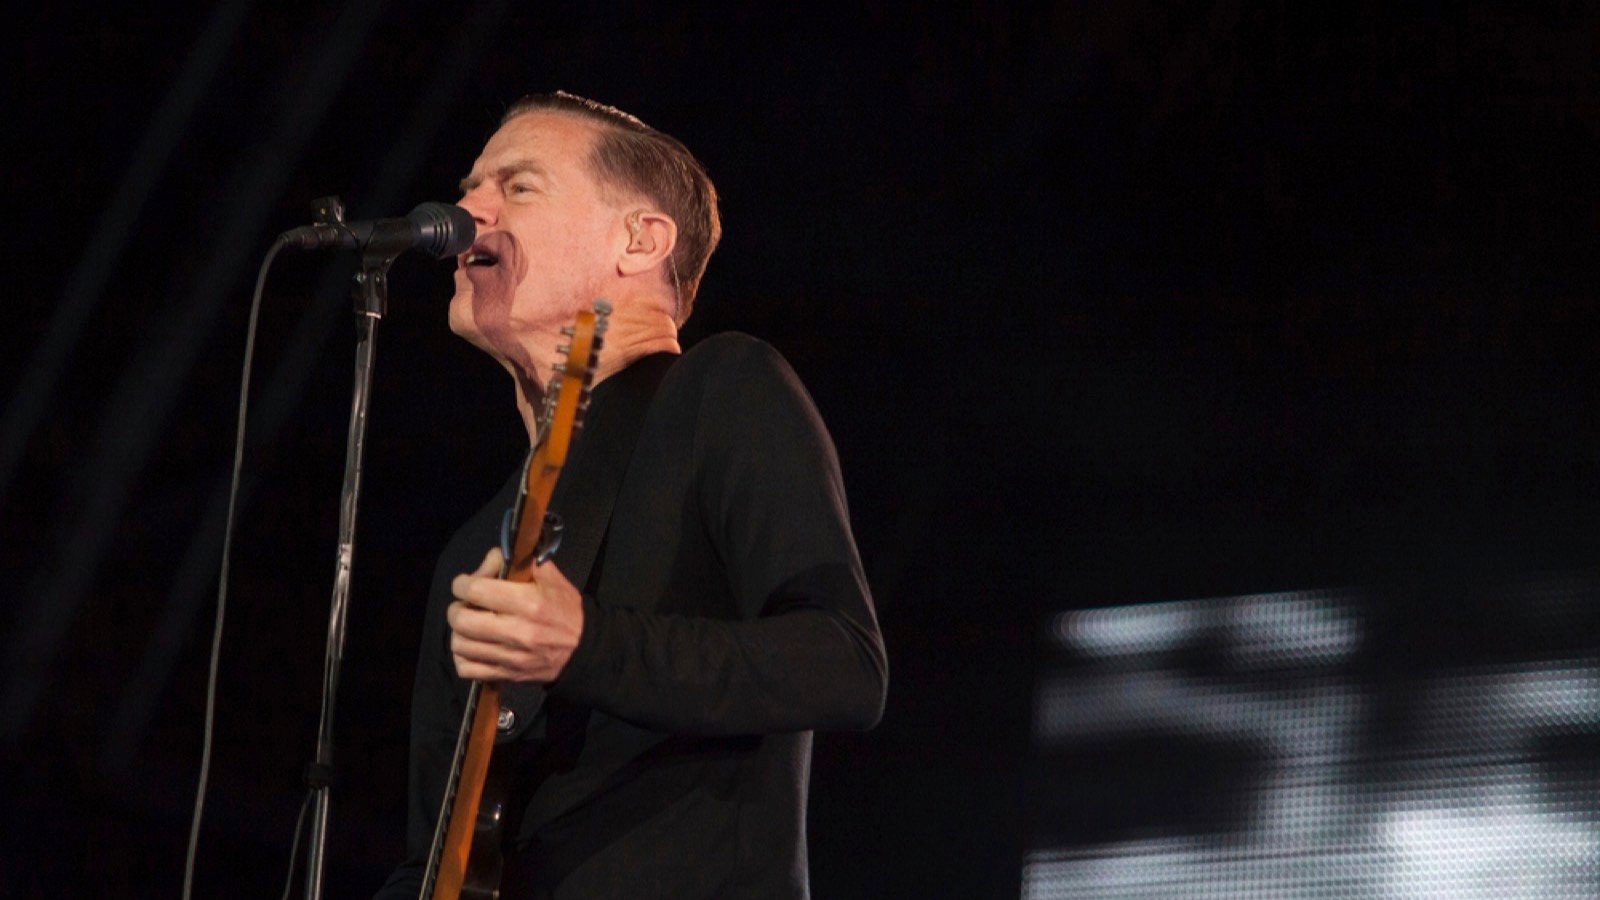 <p>Does anybody still like Bryan Adams? His absence from the discussion suggests not. Maybe we’re all too cool to listen to his music now, but for many of us, songs such as “Run to You” and “Summer of ’69” were part of our essential 80s soundtrack.</p><p>Source: <a href="https://www.reddit.com/r/Music/comments/175hd76/to_complement_the_other_thread_what_canadian/">Reddit</a>.</p>